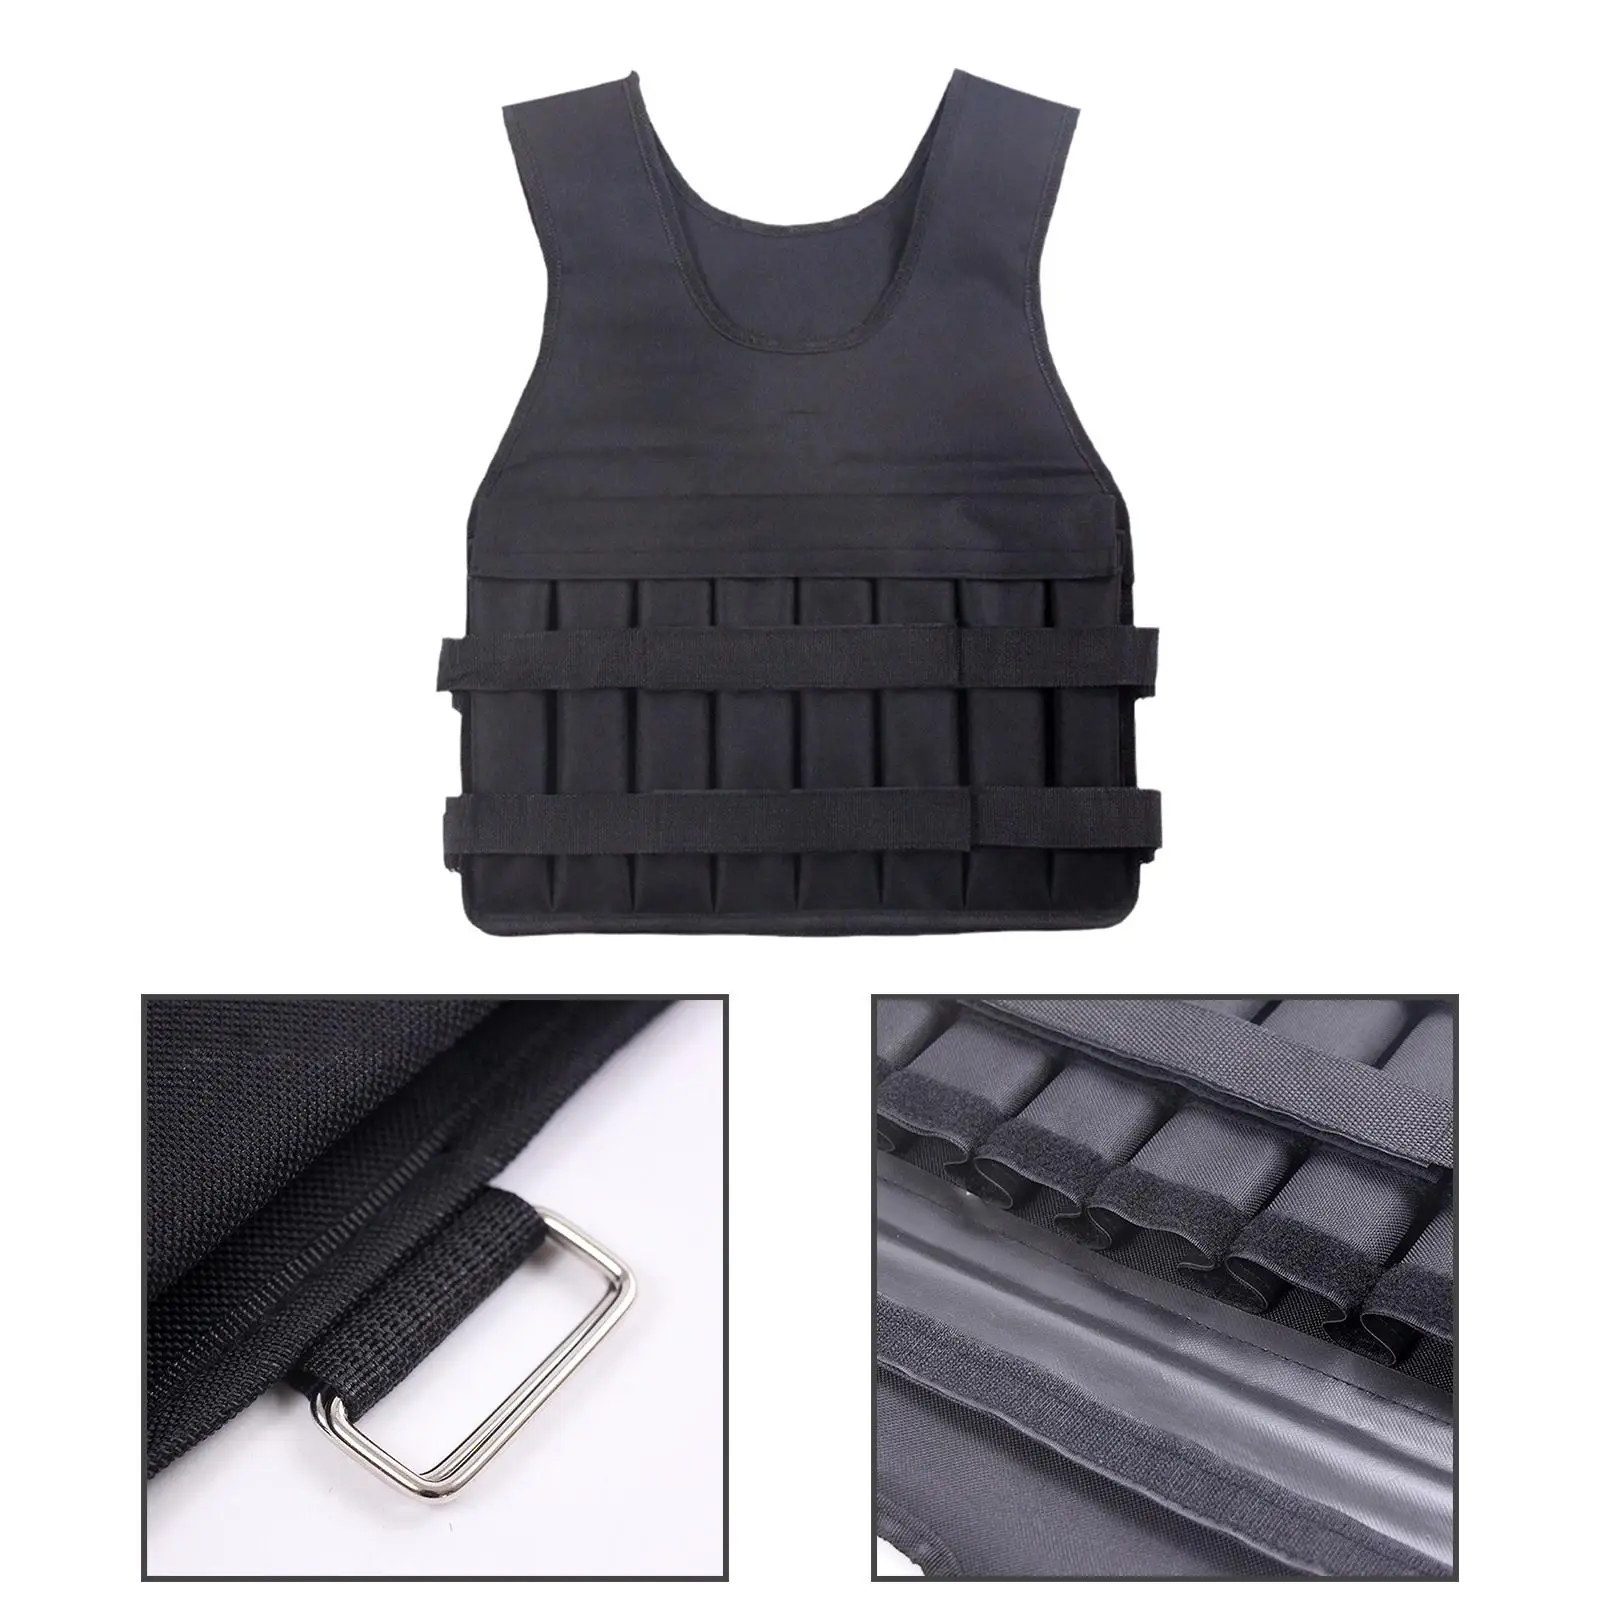 Loading Vest for Boxing Running Empty for Men and Women Weightloading Workout Exercise Jacket Body Weight Vest Boxing Waistcoat